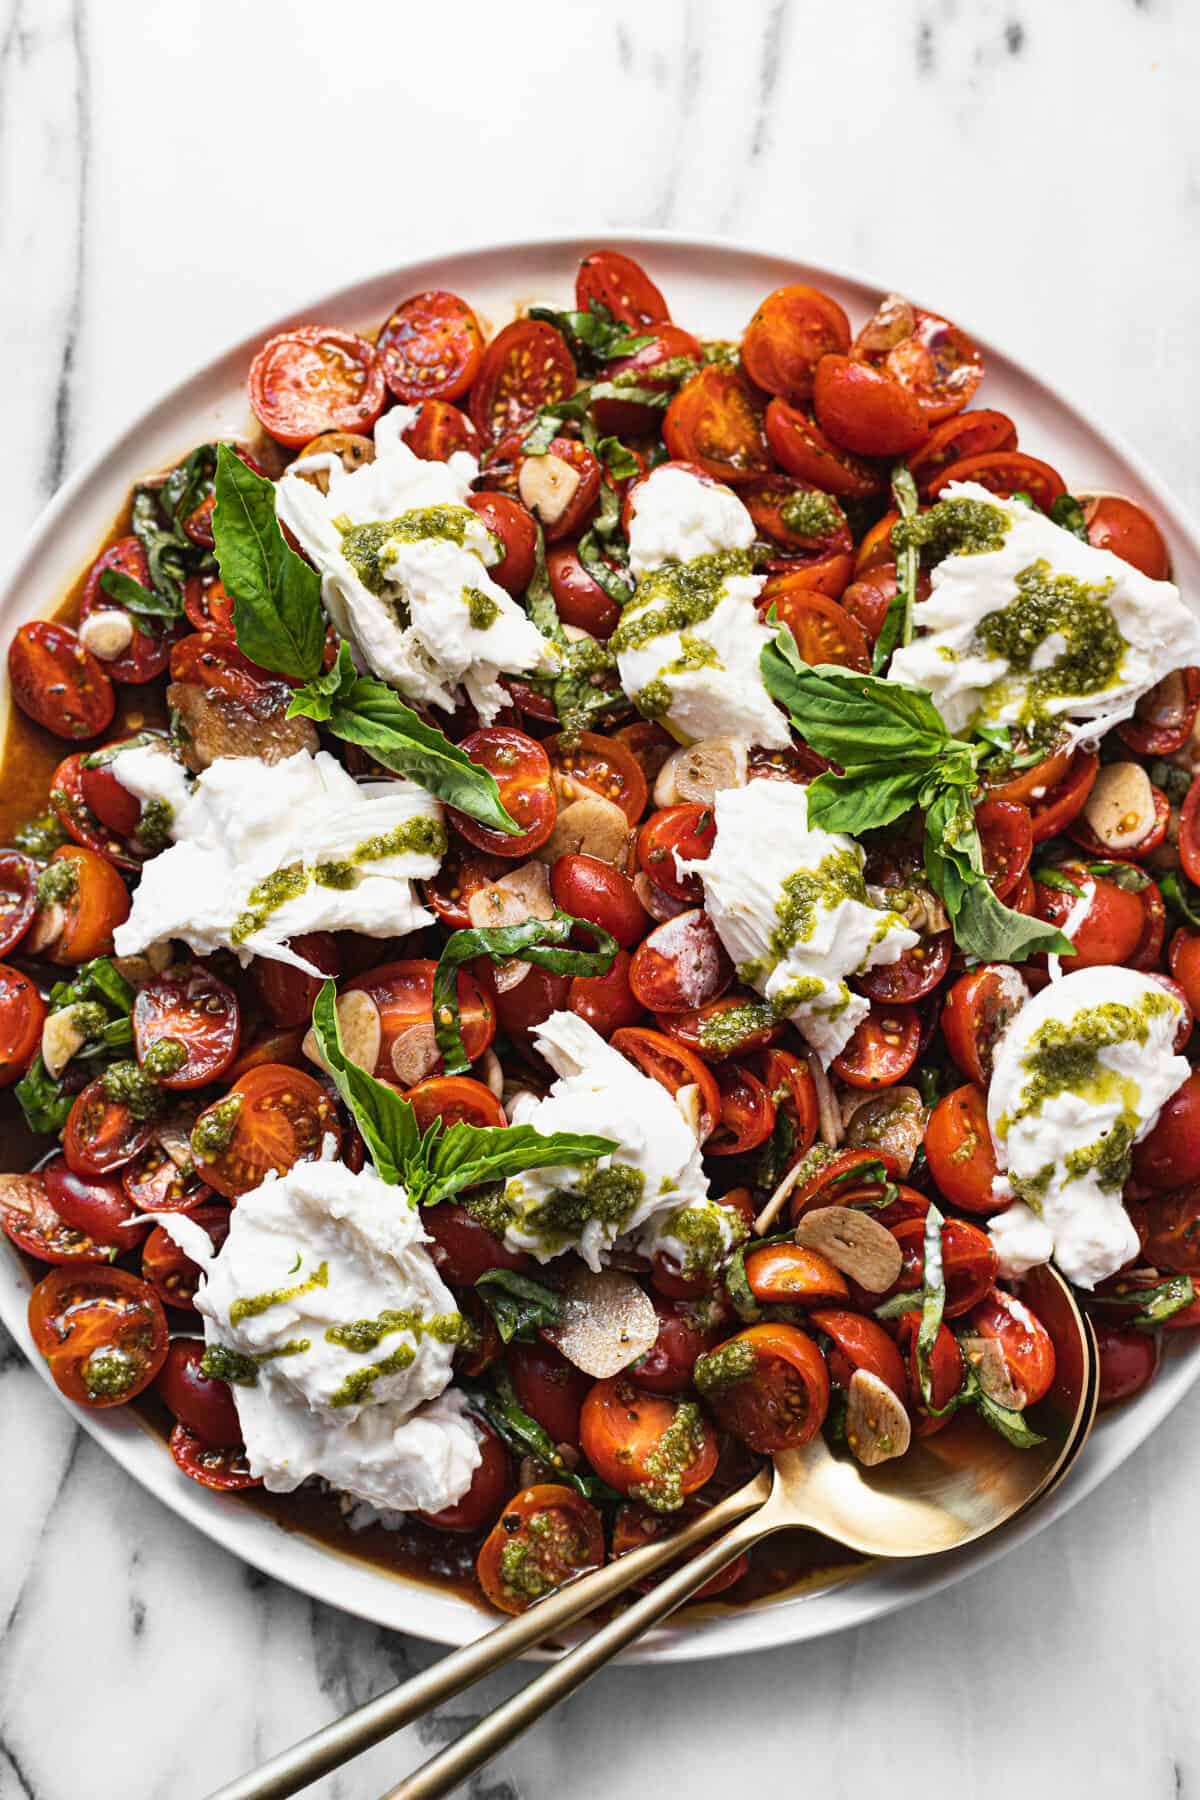 Large white plate with sliced tomatoes and burrata salad garnished with pesto.